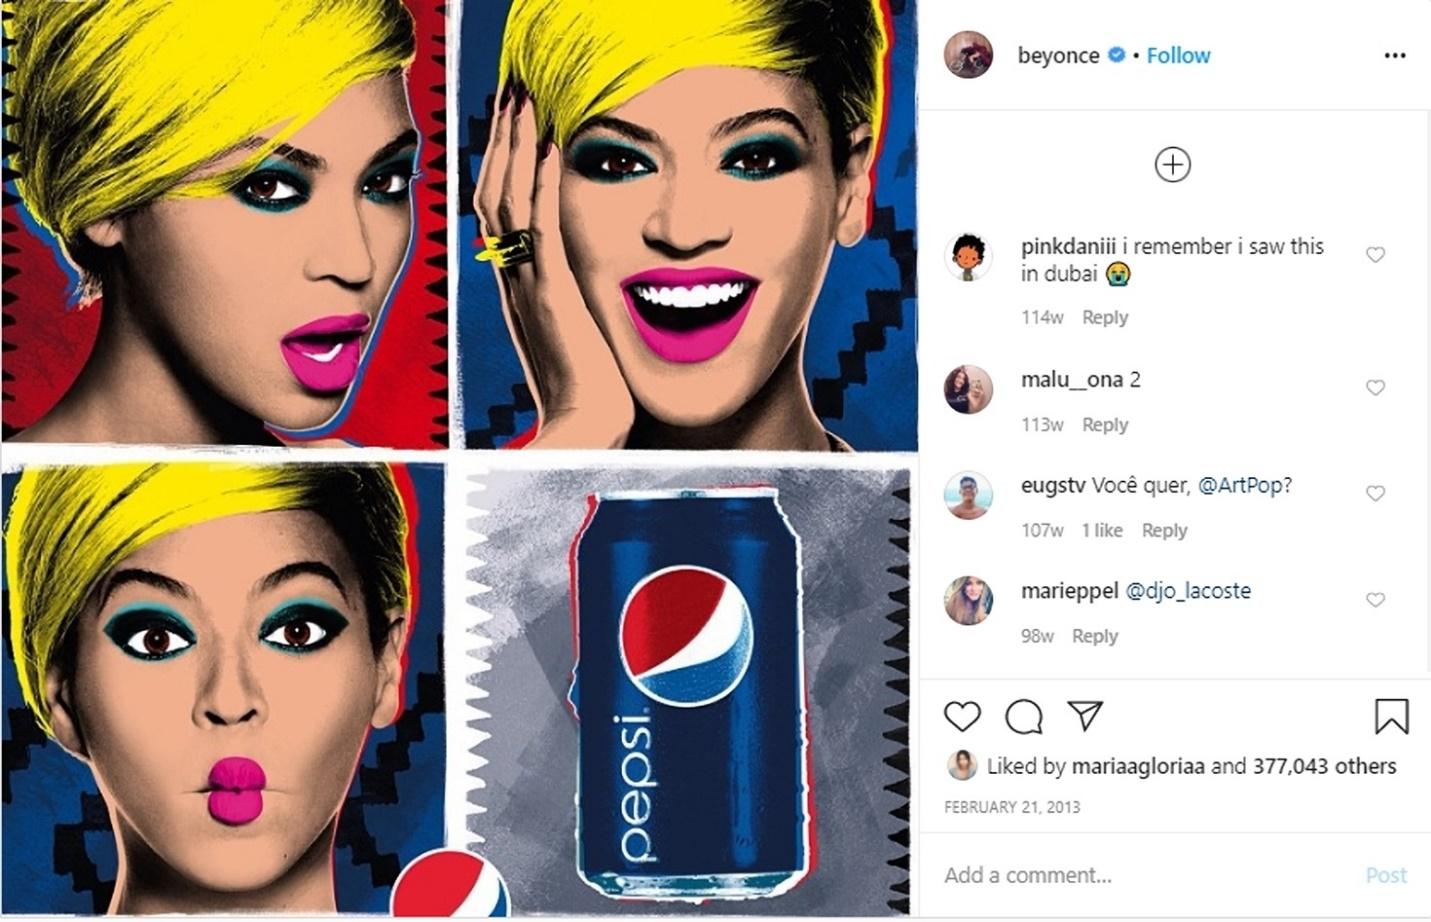 Beyonce influencer instagram post for Pepsi